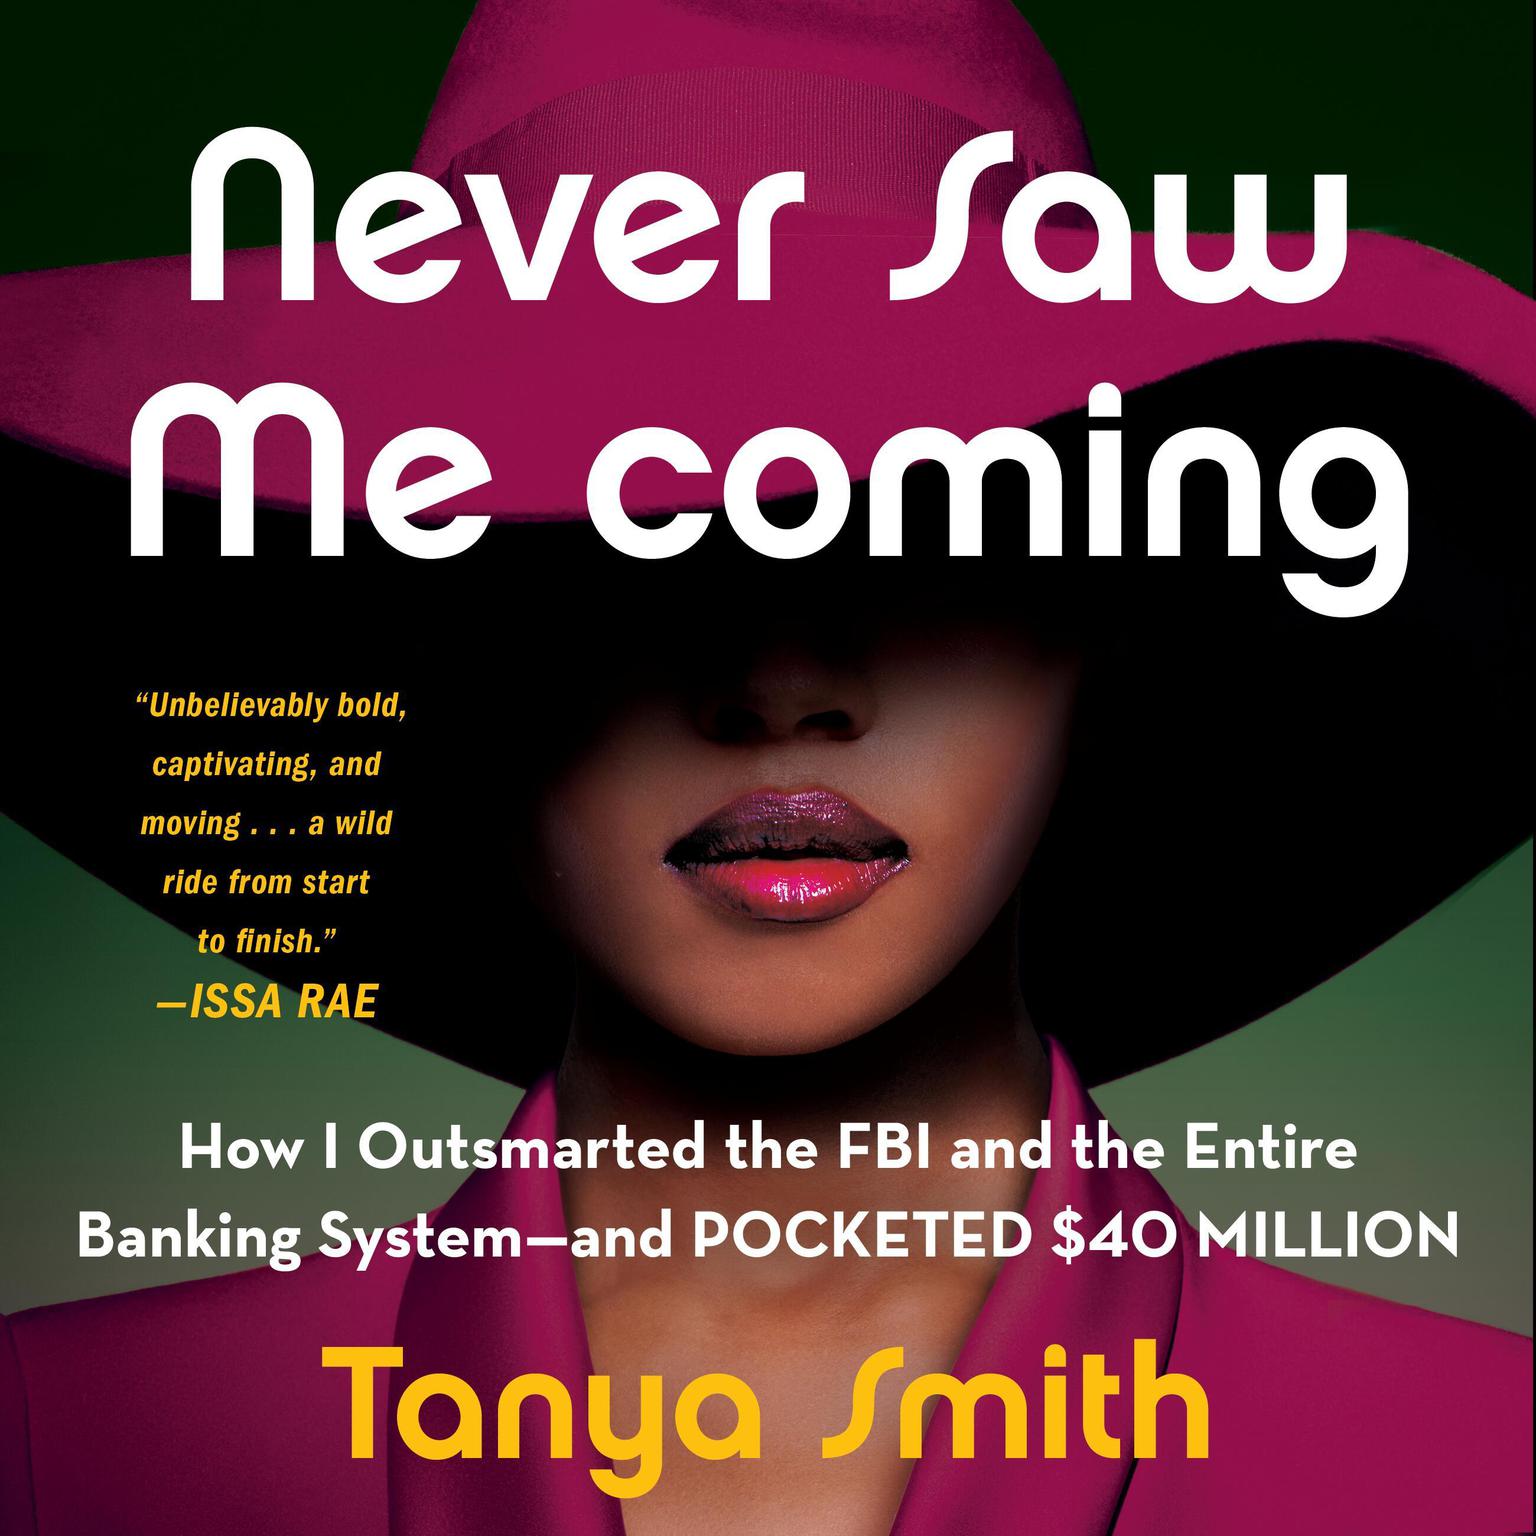 Never Saw Me Coming: How I Outsmarted the FBI and the Entire Banking System—and Pocketed $40 Million Audiobook, by Tanya Smith